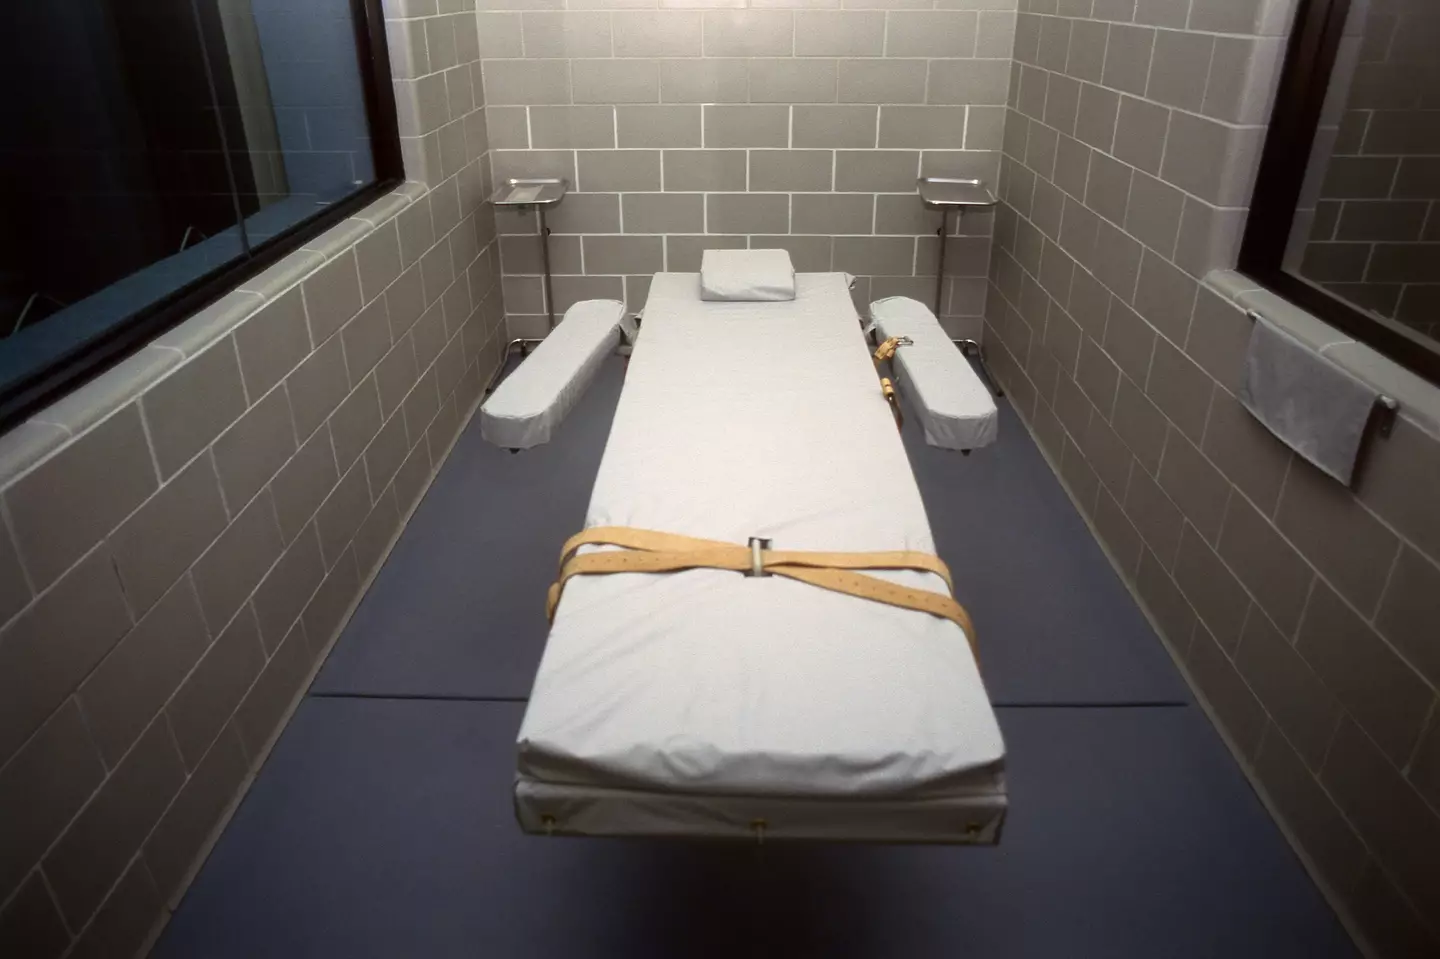 Clarence Dixon was executed by lethal injection on 11 May.